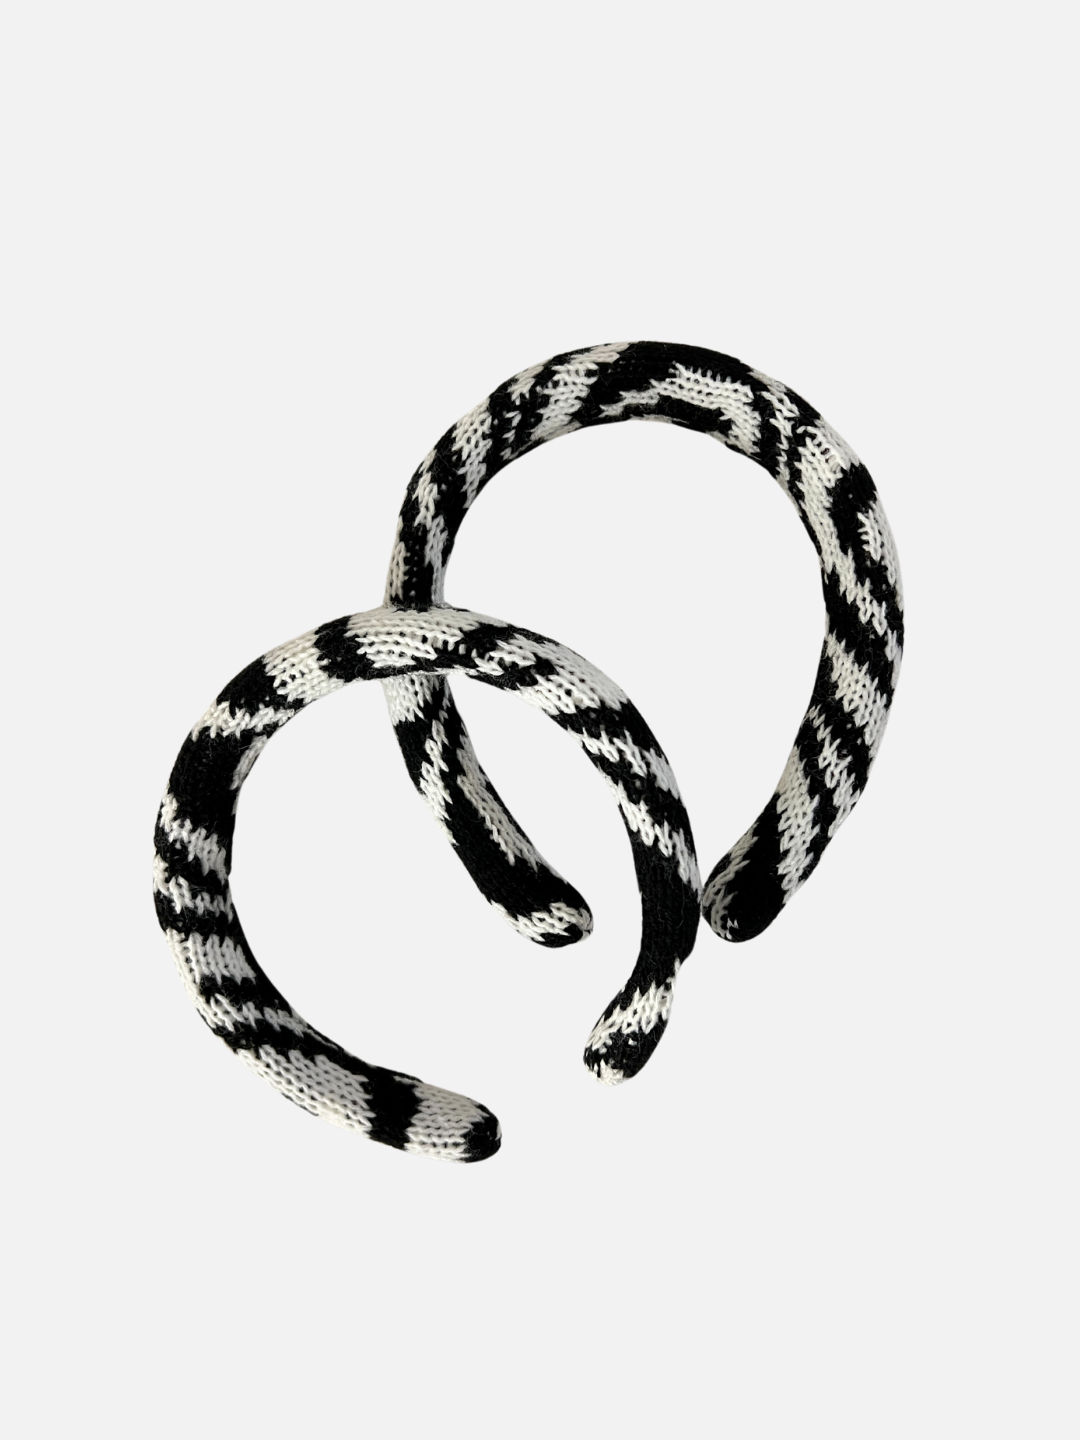 Two sizes of kids' knitted headband in swirls of black and white